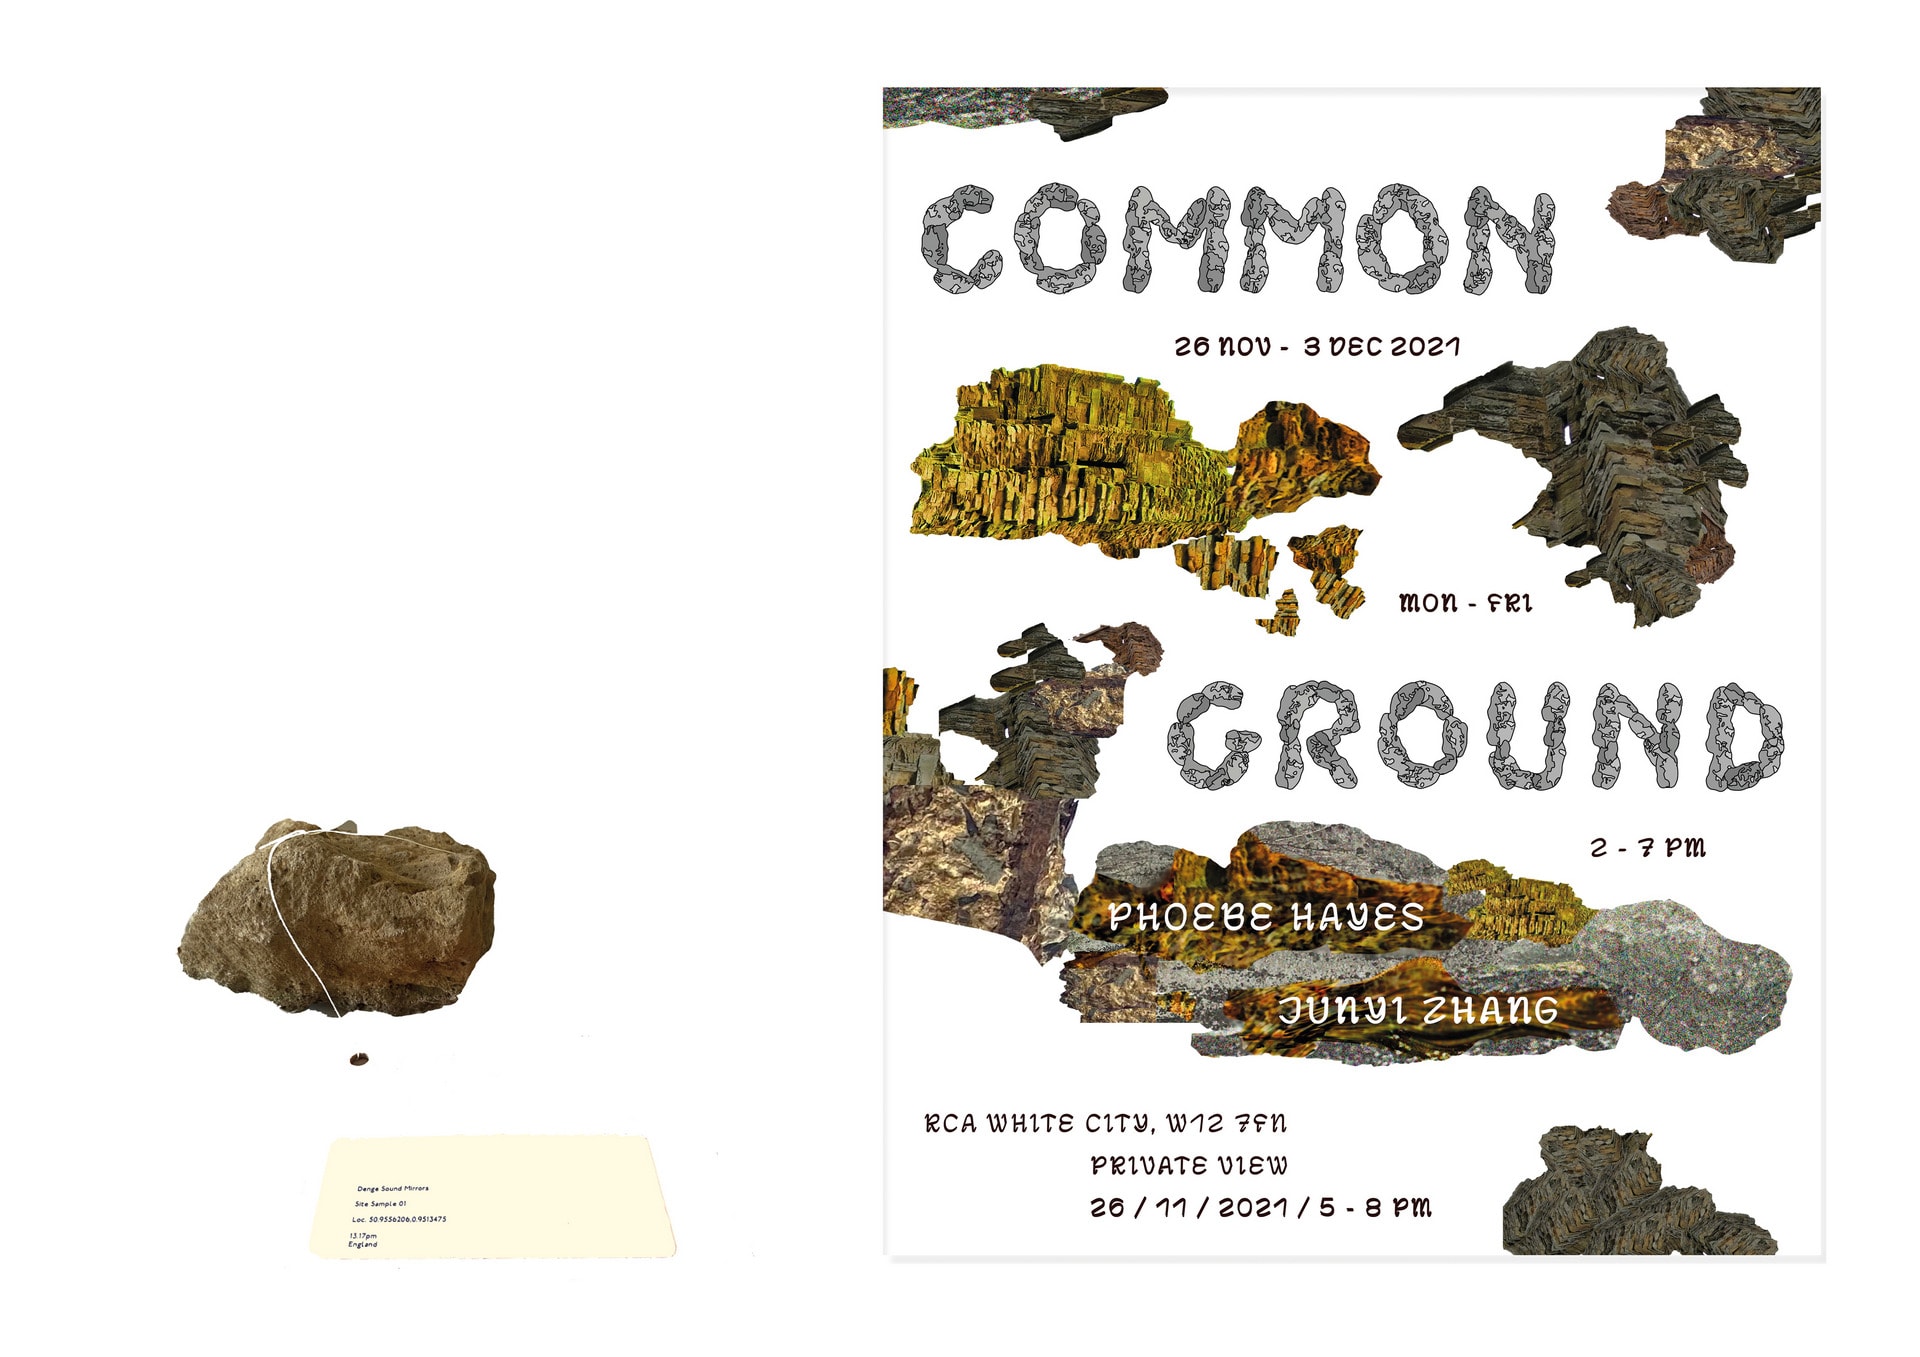 Poster and type design inspired by fragments and site-samples collected from our travels to Hascombe